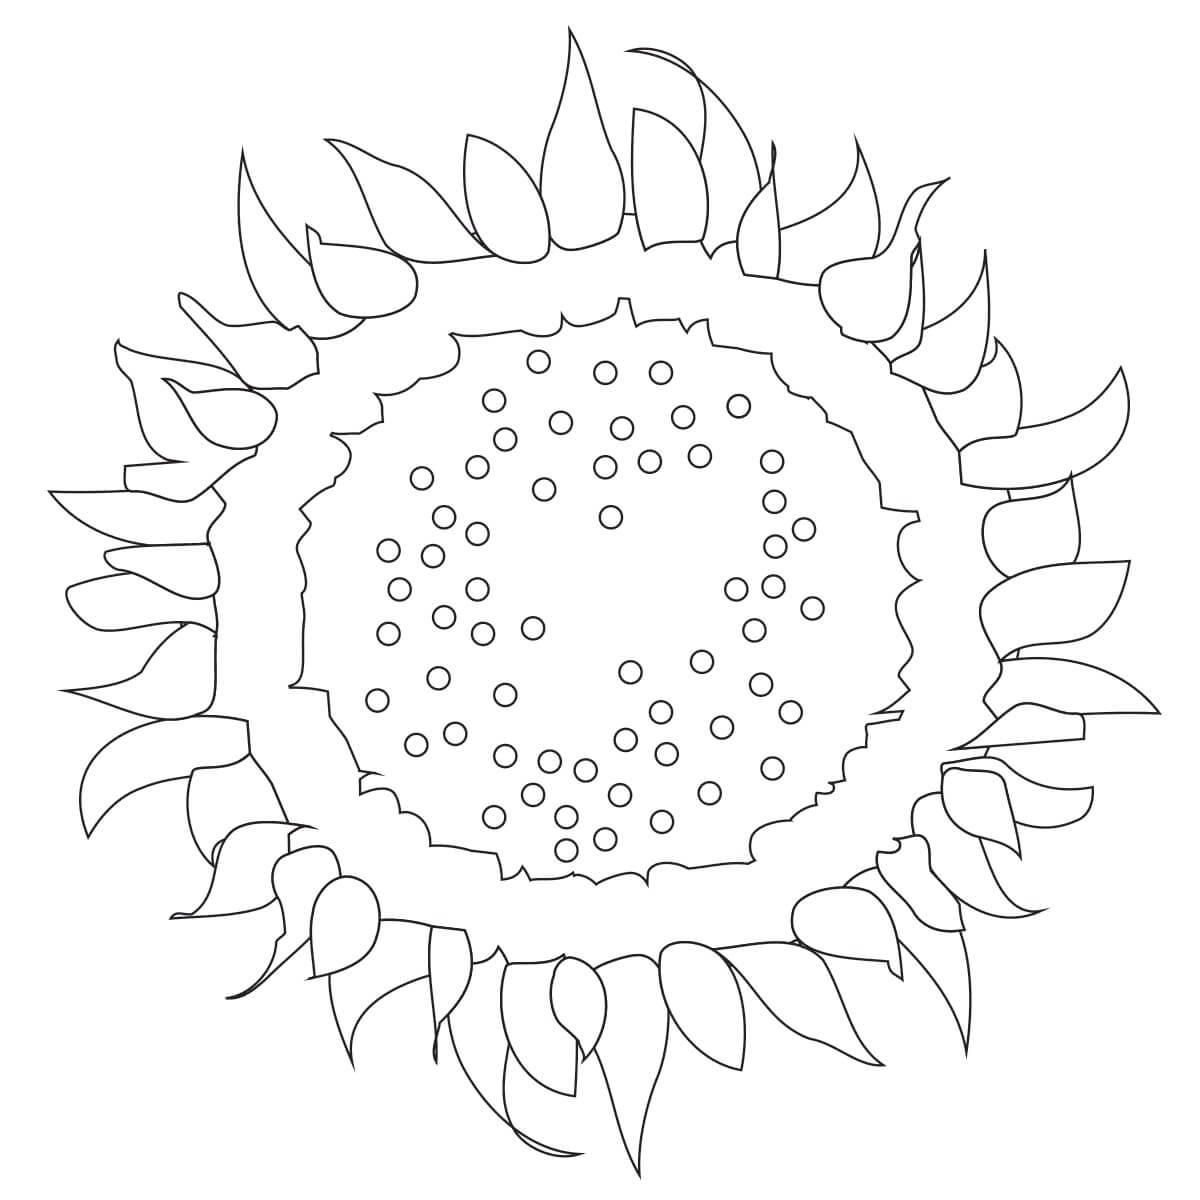 Sunflower free idea coloring page